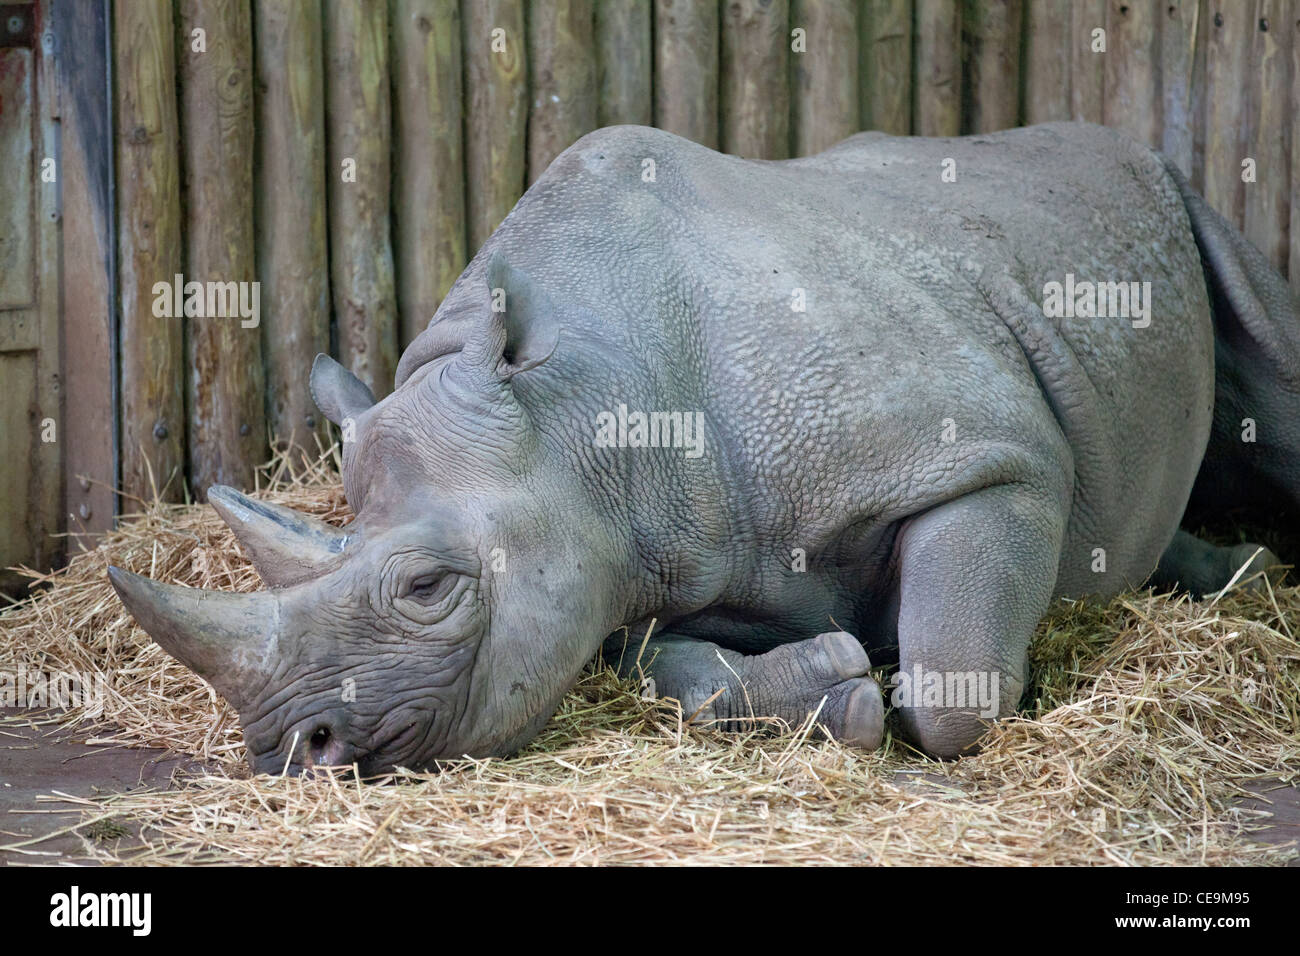 a hippopotamus rests in it's enclosure at a zoo Stock Photo